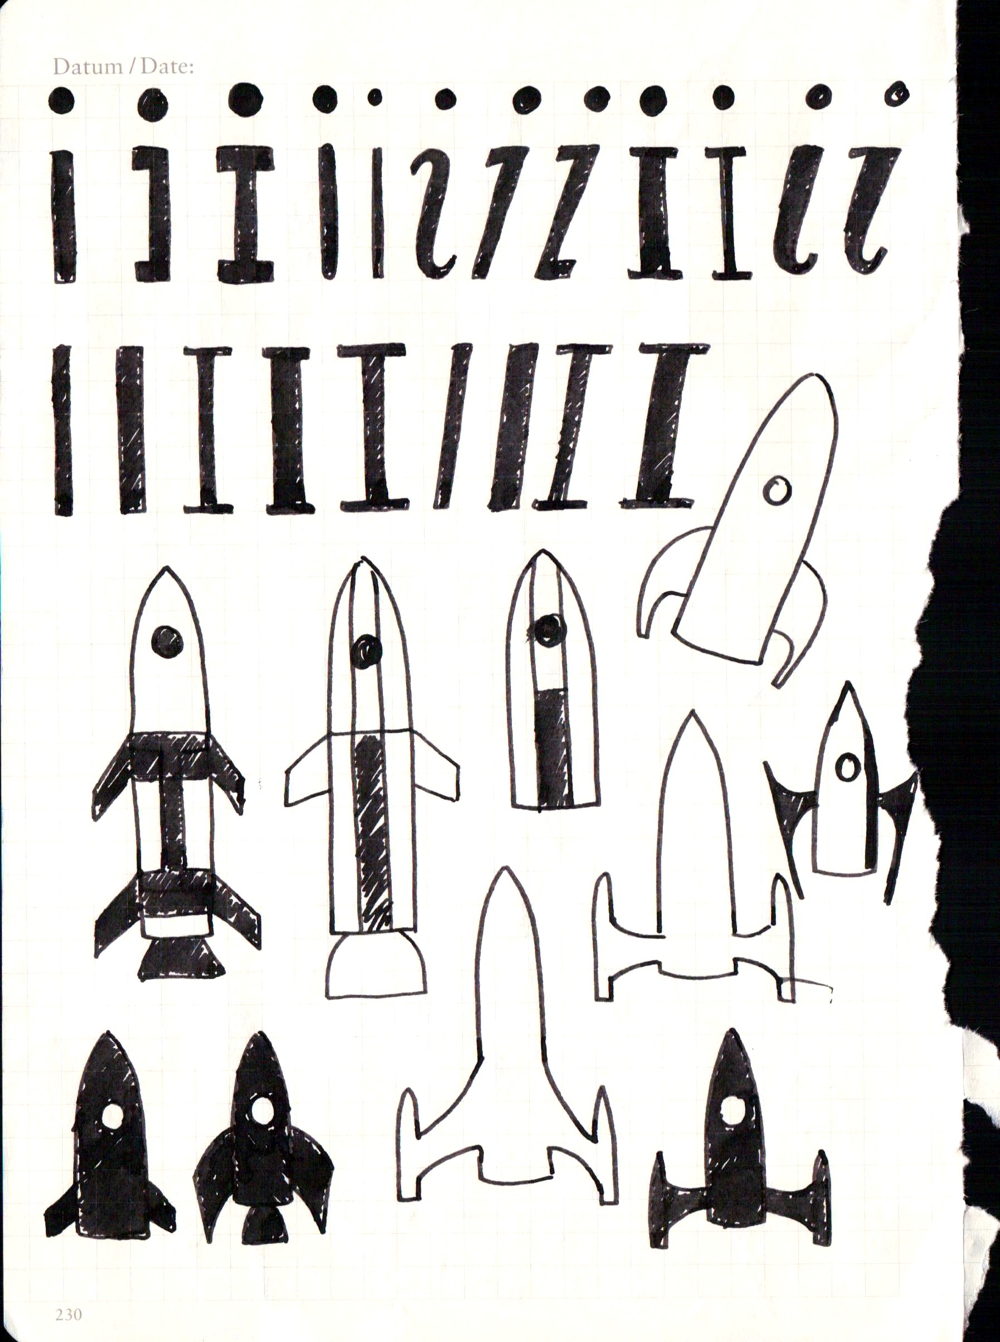 Rocket sketches from Indie Phone